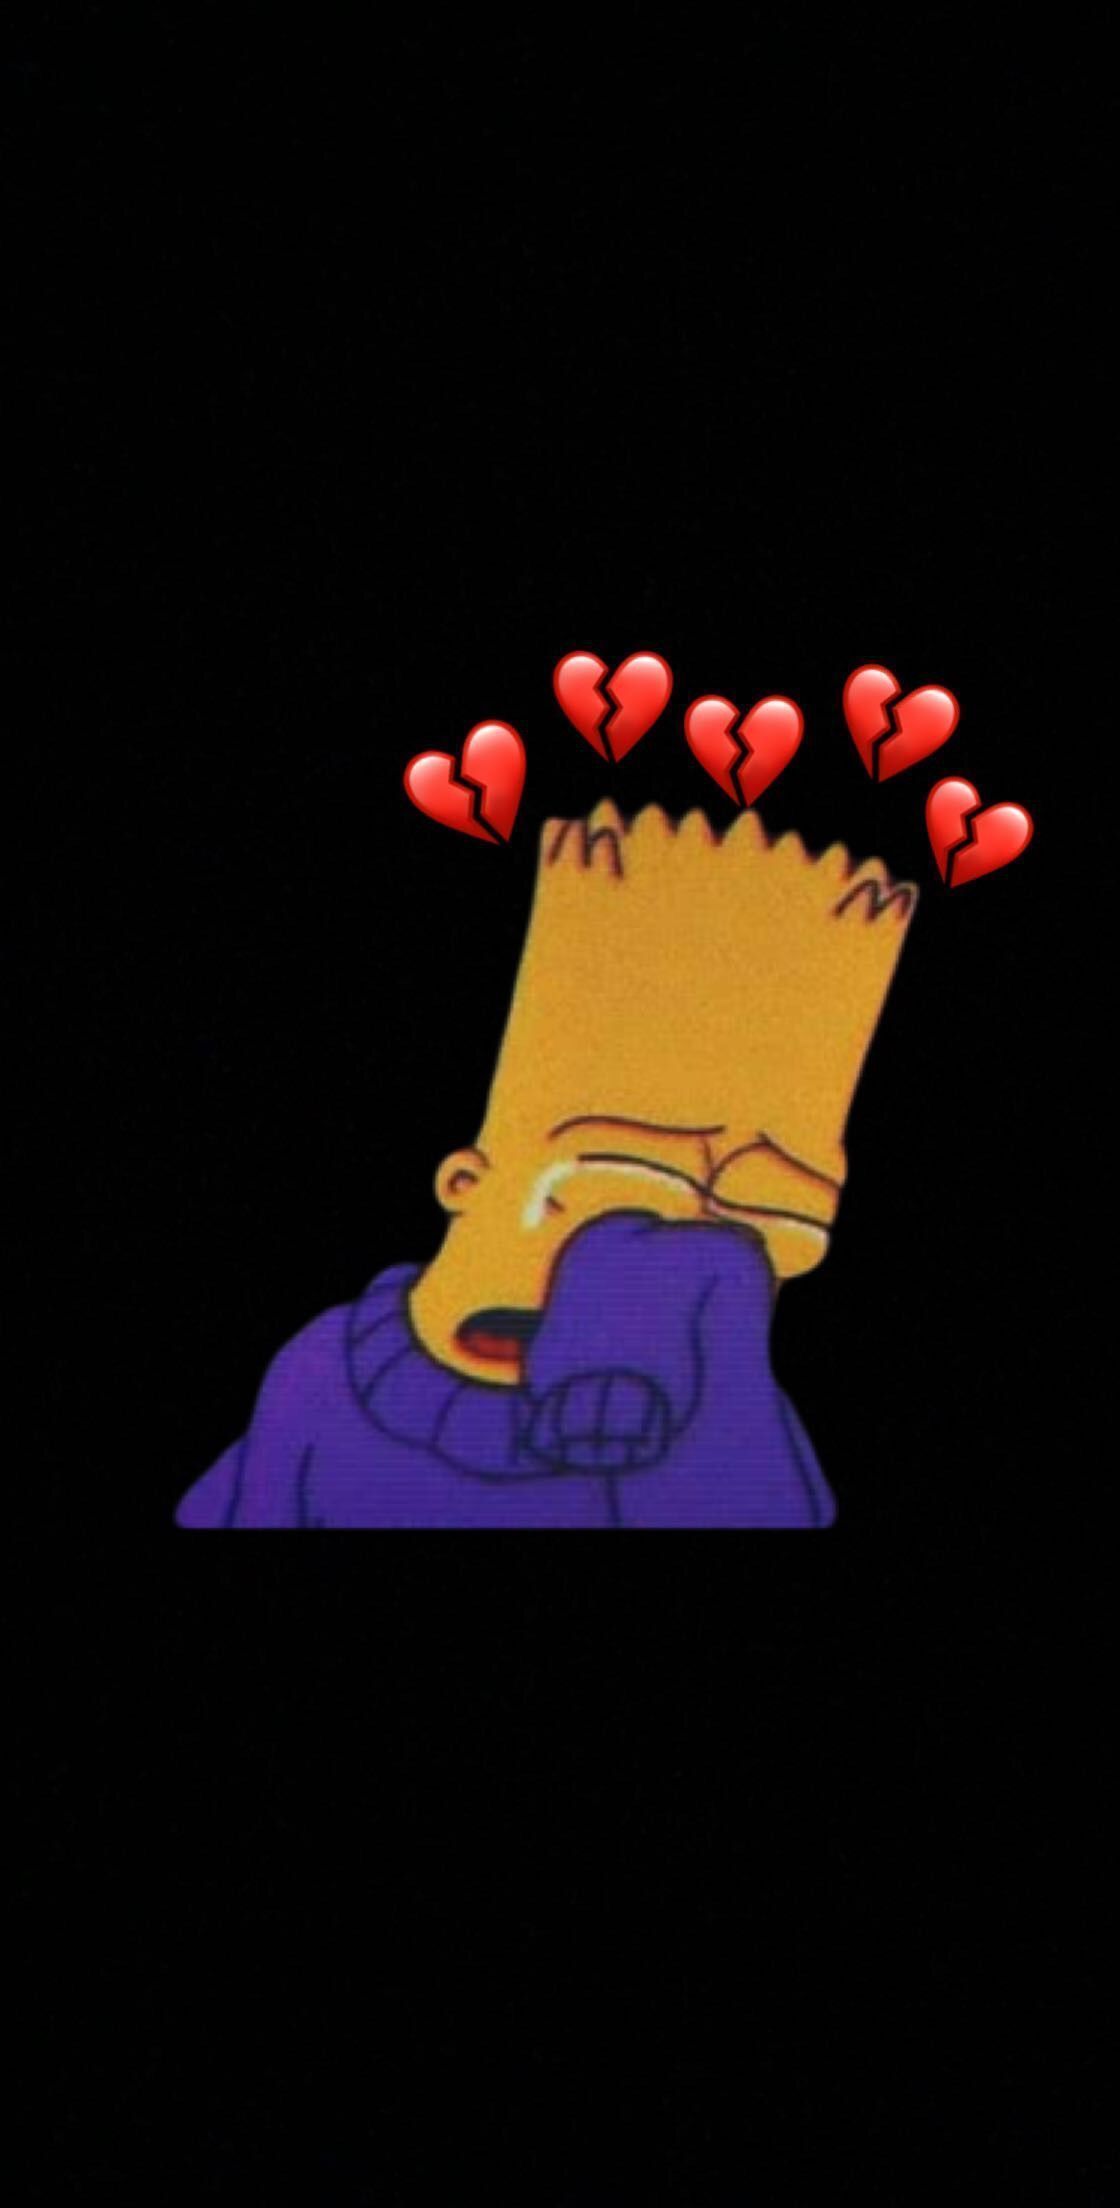 A simpsons character is crying with hearts around it - The Simpsons